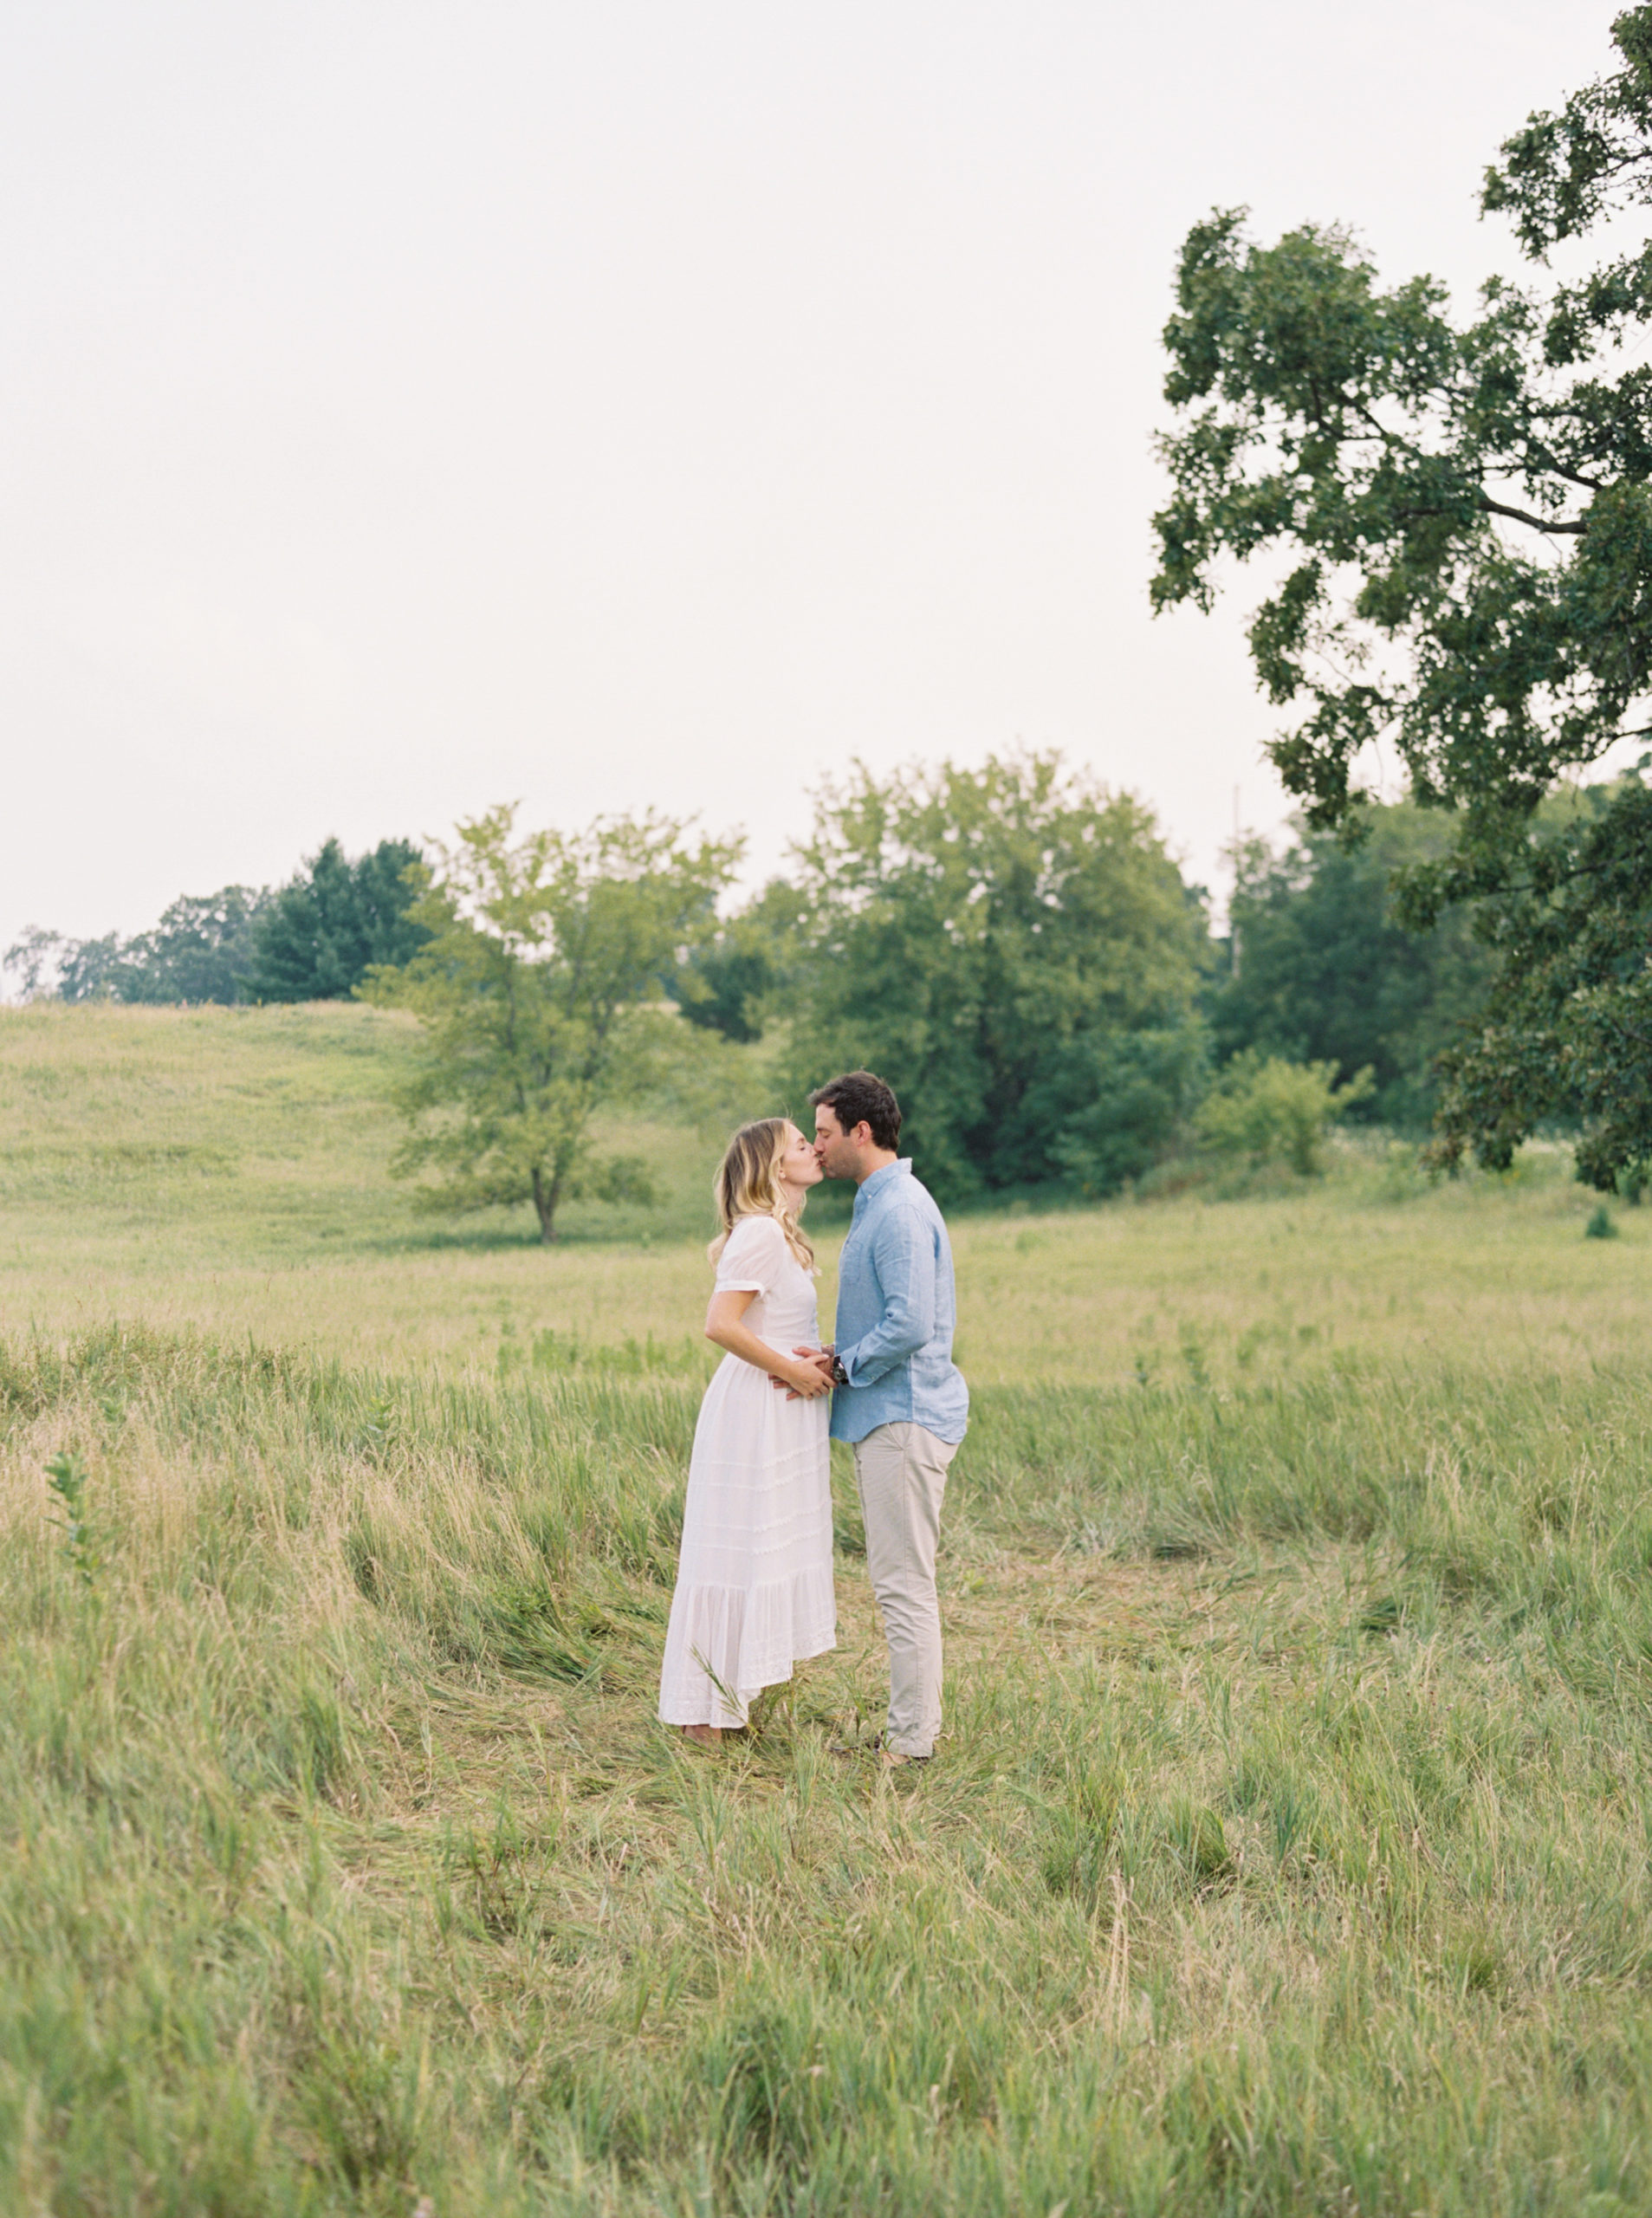 Kissing in the field